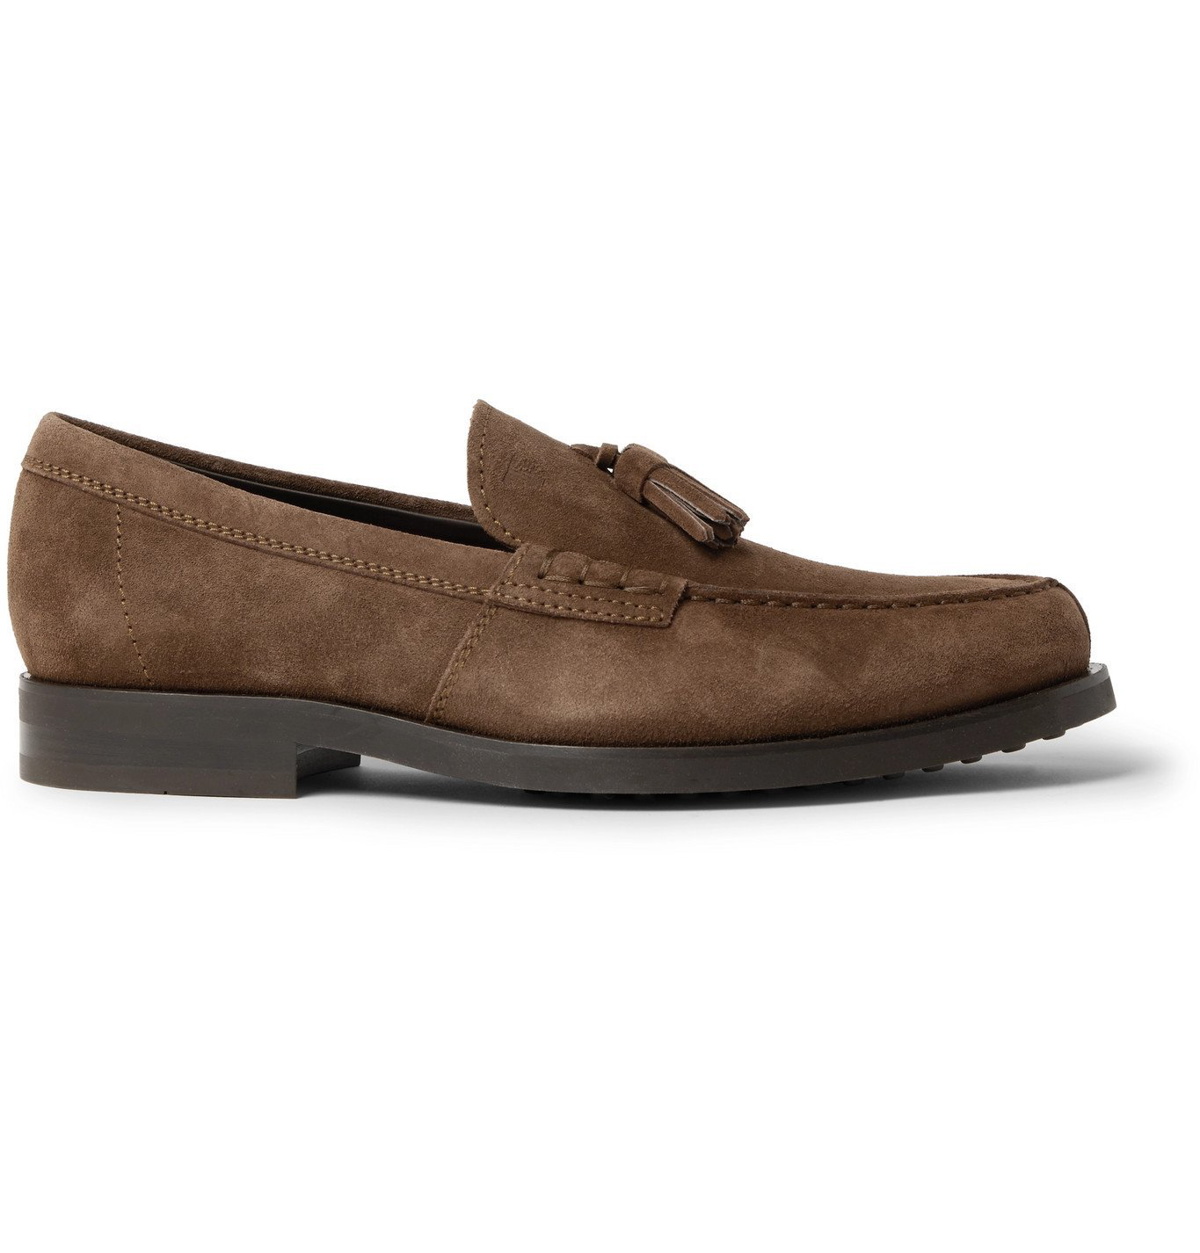 Tod's - Suede Tasselled Loafers - Brown Tod's